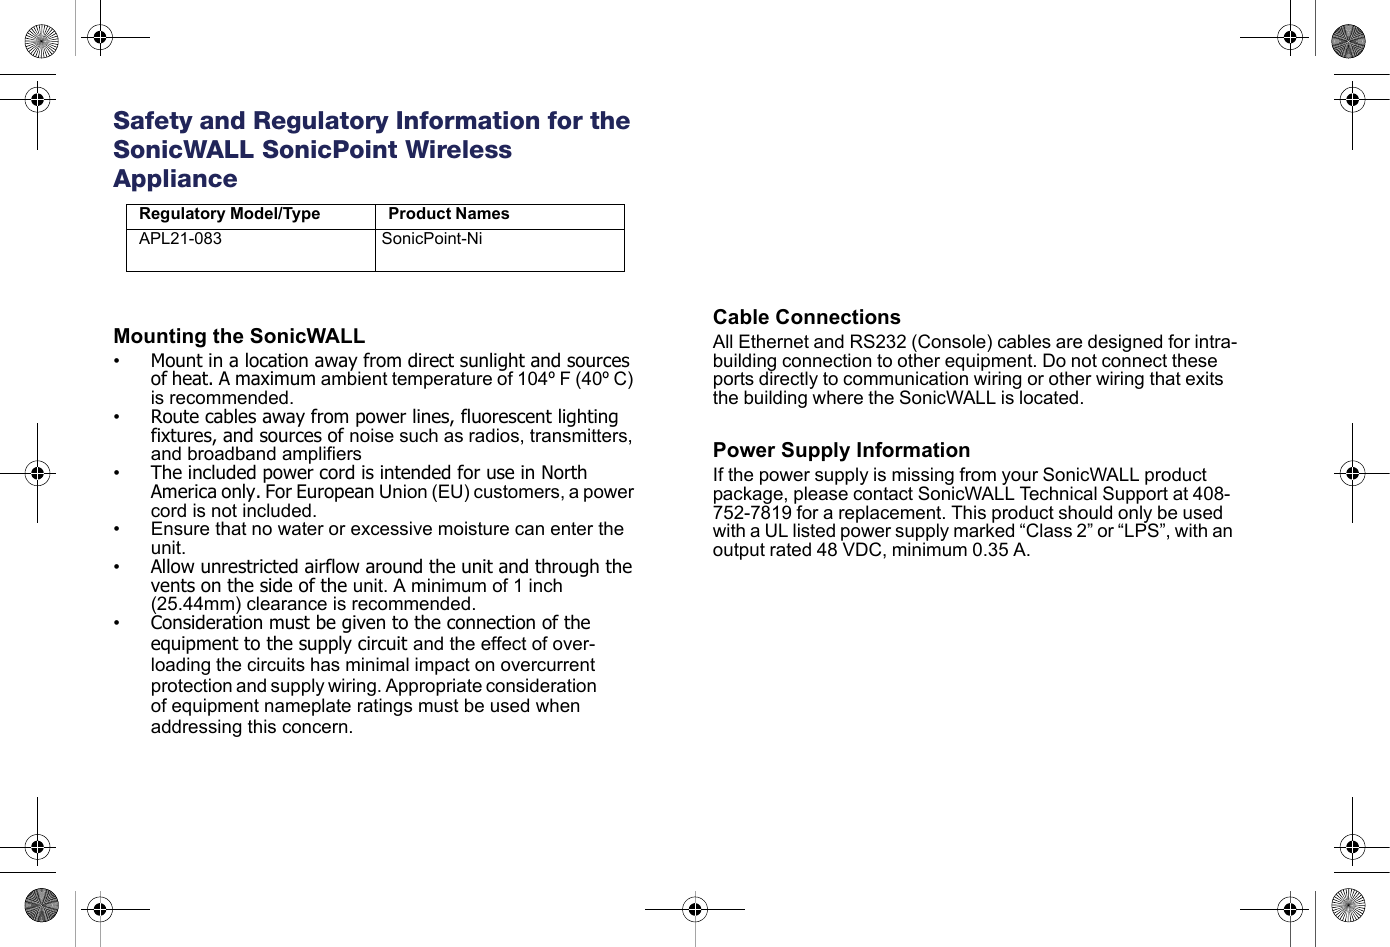   Safety and Regulatory Information for the SonicWALL SonicPoint Wireless ApplianceMounting the SonicWALL•Mount in a location away from direct sunlight and sources of heat. A maximum ambient temperature of 104º F (40º C) is recommended.•Route cables away from power lines, fluorescent lighting fixtures, and sources of noise such as radios, transmitters, and broadband amplifiers•The included power cord is intended for use in North America only. For European Union (EU) customers, a power cord is not included.• Ensure that no water or excessive moisture can enter the unit.•Allow unrestricted airflow around the unit and through the vents on the side of the unit. A minimum of 1 inch (25.44mm) clearance is recommended.•Consideration must be given to the connection of the equipment to the supply circuit and the effect of over-loading the circuits has minimal impact on overcurrent protection and supply wiring. Appropriate consideration of equipment nameplate ratings must be used when addressing this concern.Cable ConnectionsAll Ethernet and RS232 (Console) cables are designed for intra-building connection to other equipment. Do not connect these ports directly to communication wiring or other wiring that exits the building where the SonicWALL is located. Power Supply InformationIf the power supply is missing from your SonicWALL product package, please contact SonicWALL Technical Support at 408-752-7819 for a replacement. This product should only be used with a UL listed power supply marked “Class 2” or “LPS”, with an output rated 48 VDC, minimum 0.35 A.Regulatory Model/Type Product NamesAPL21-083       SonicPoint-Ni